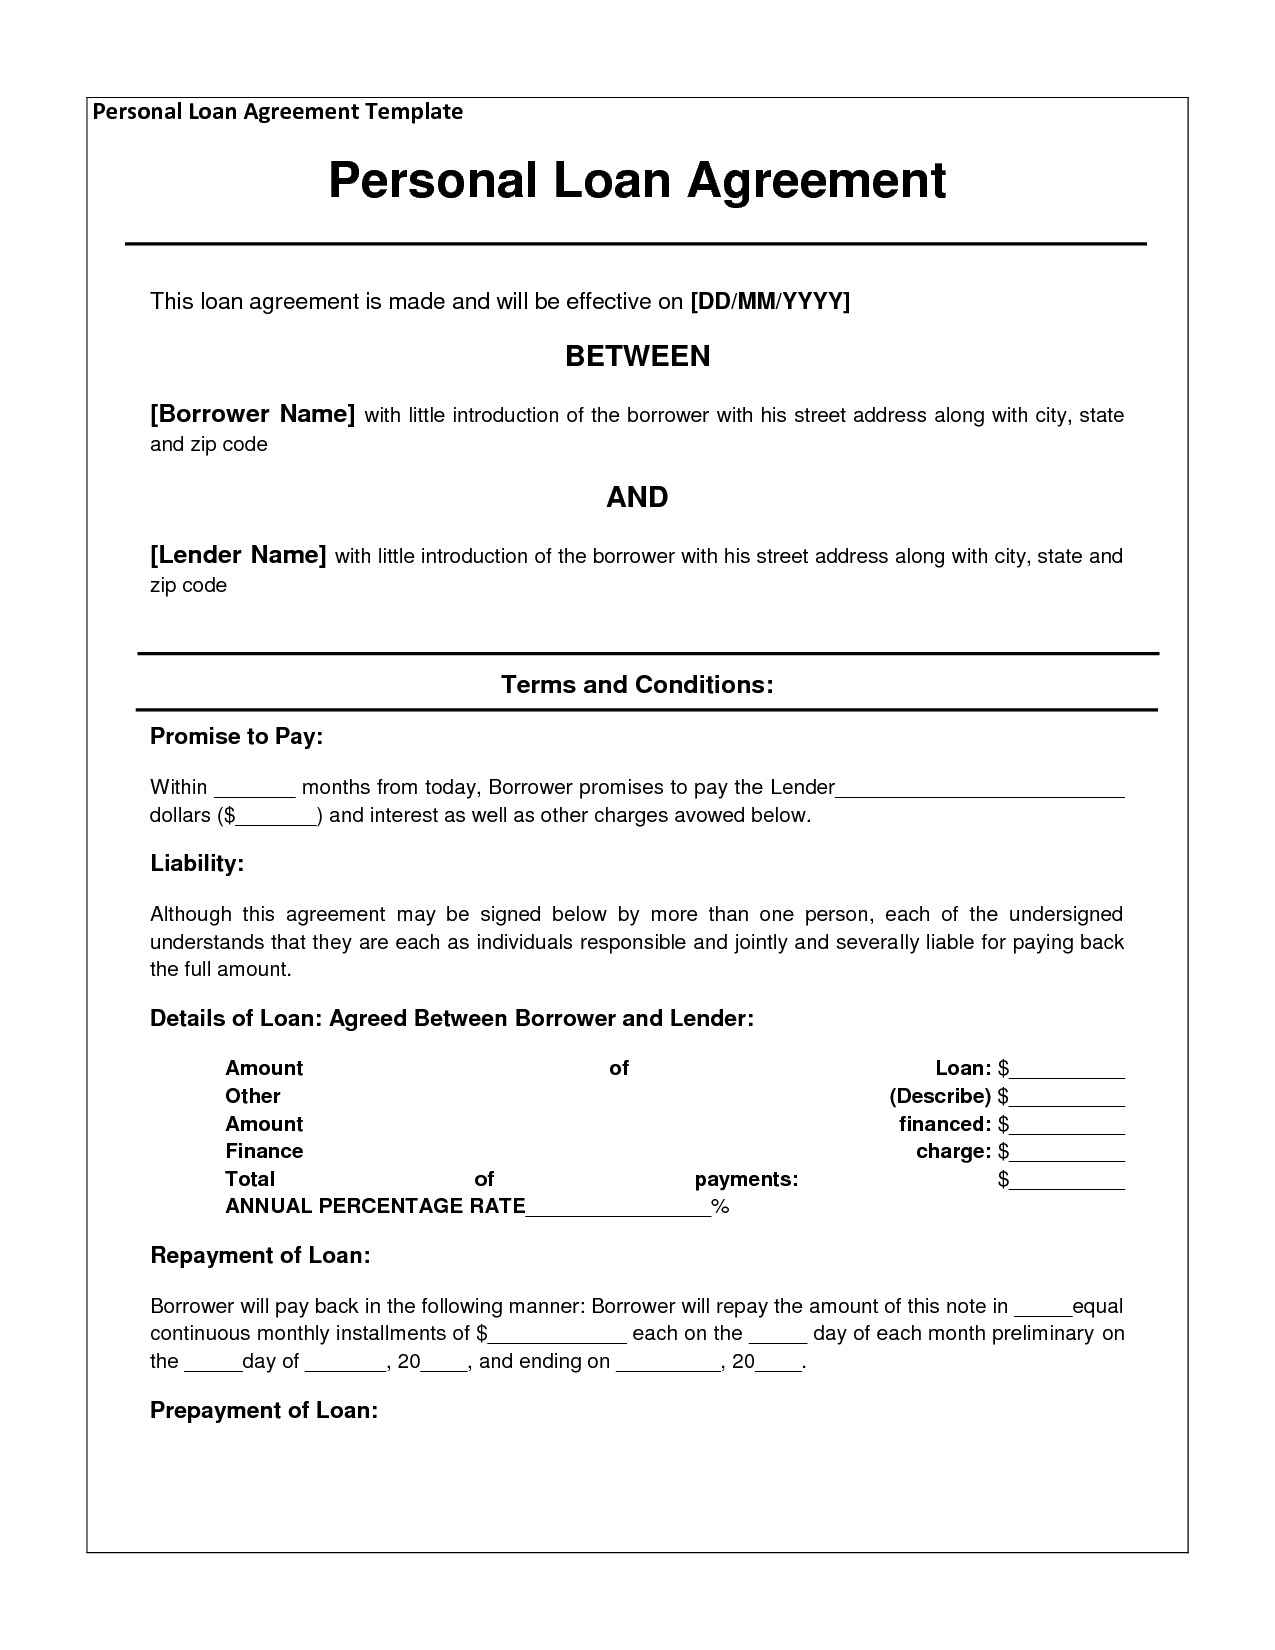 Personal Loan Agreement | Printable Agreements private loan 